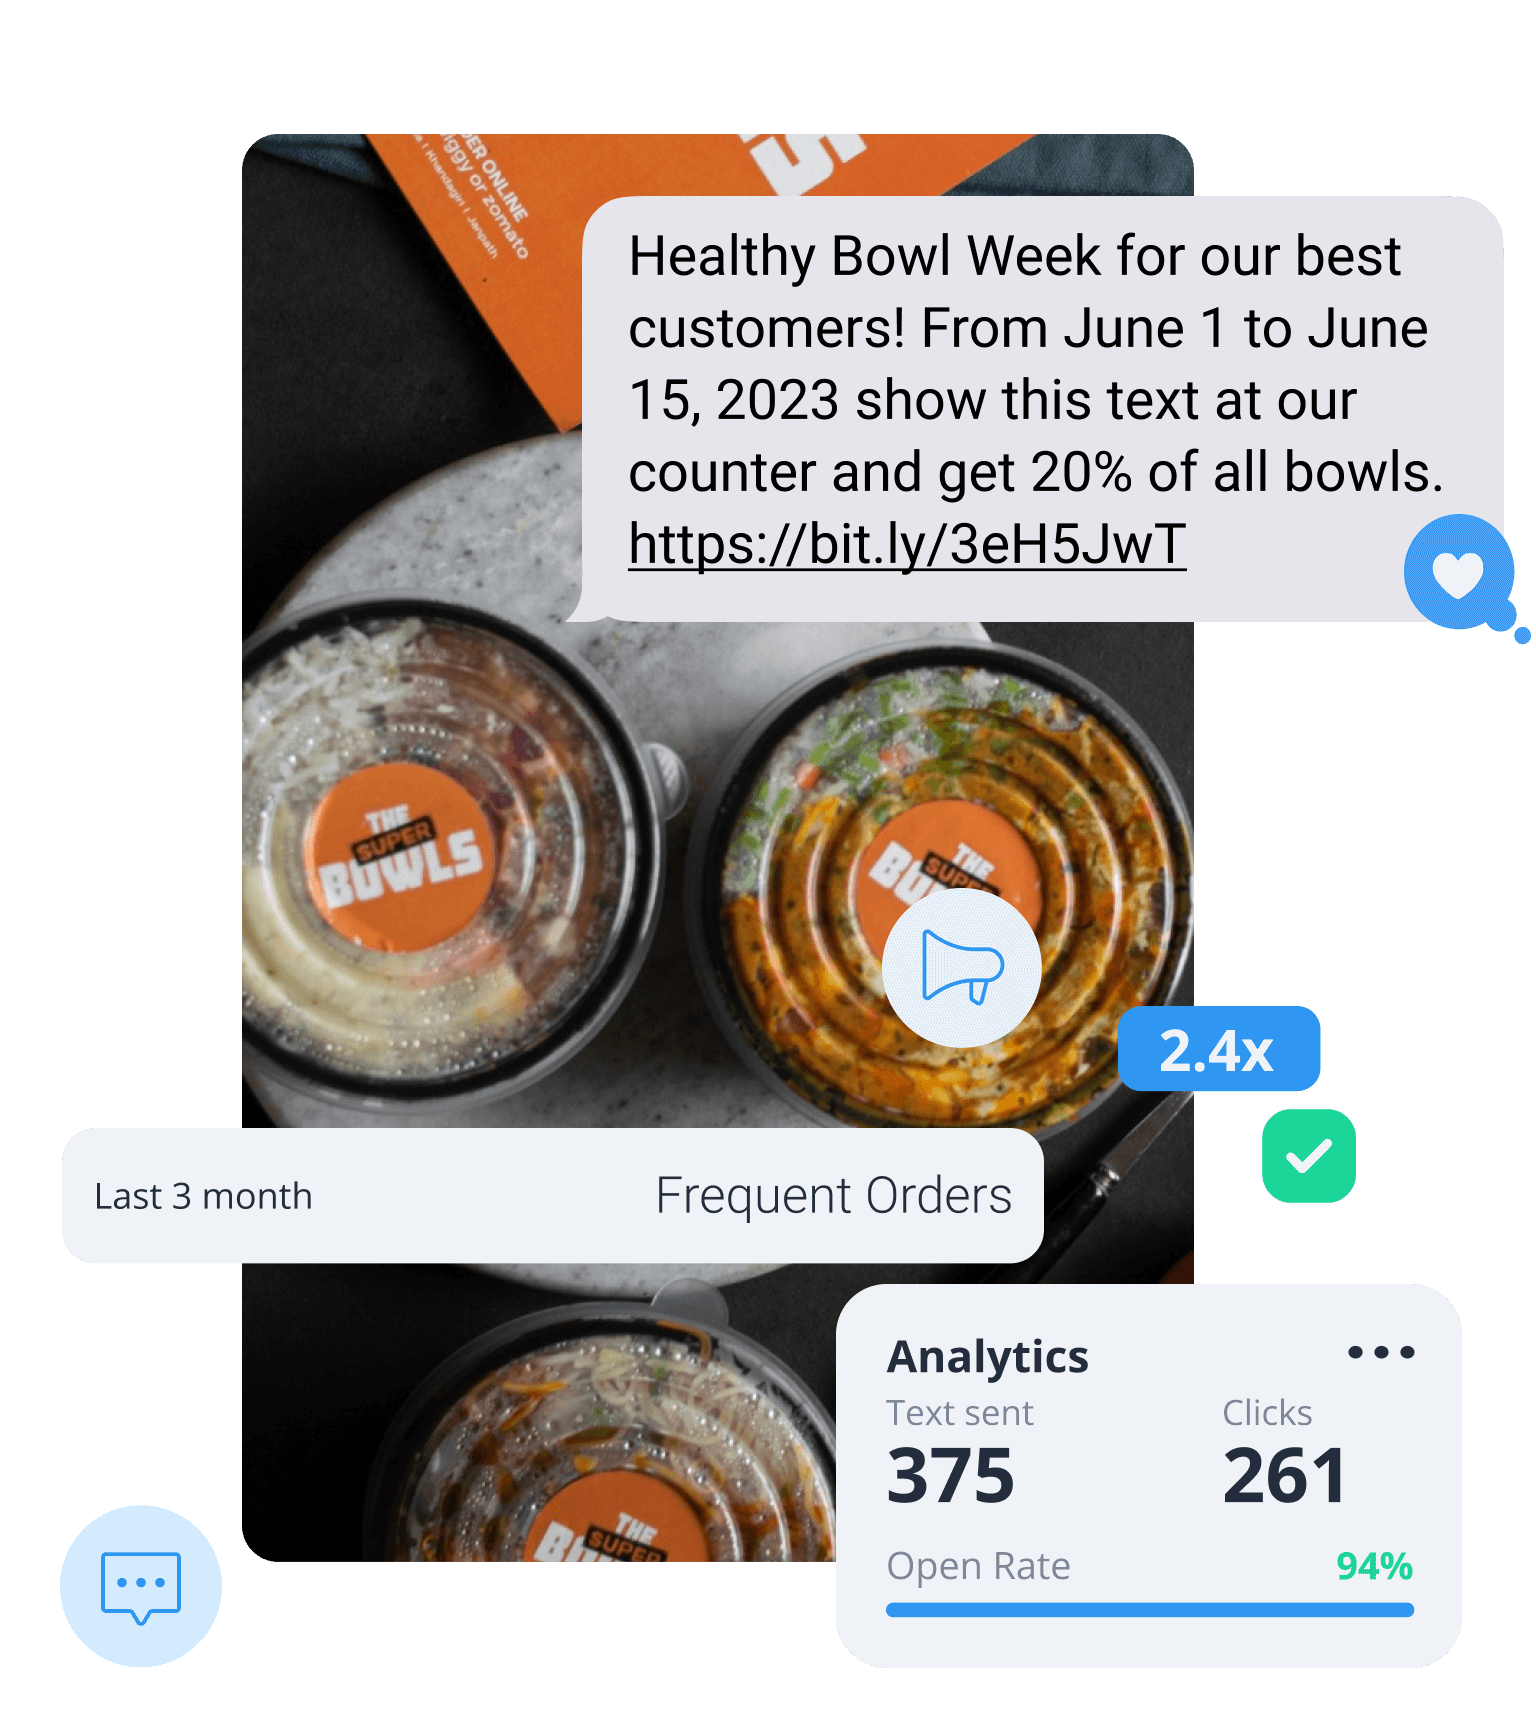 Image of meals in refrigerator with a text message bubble above them that reads 